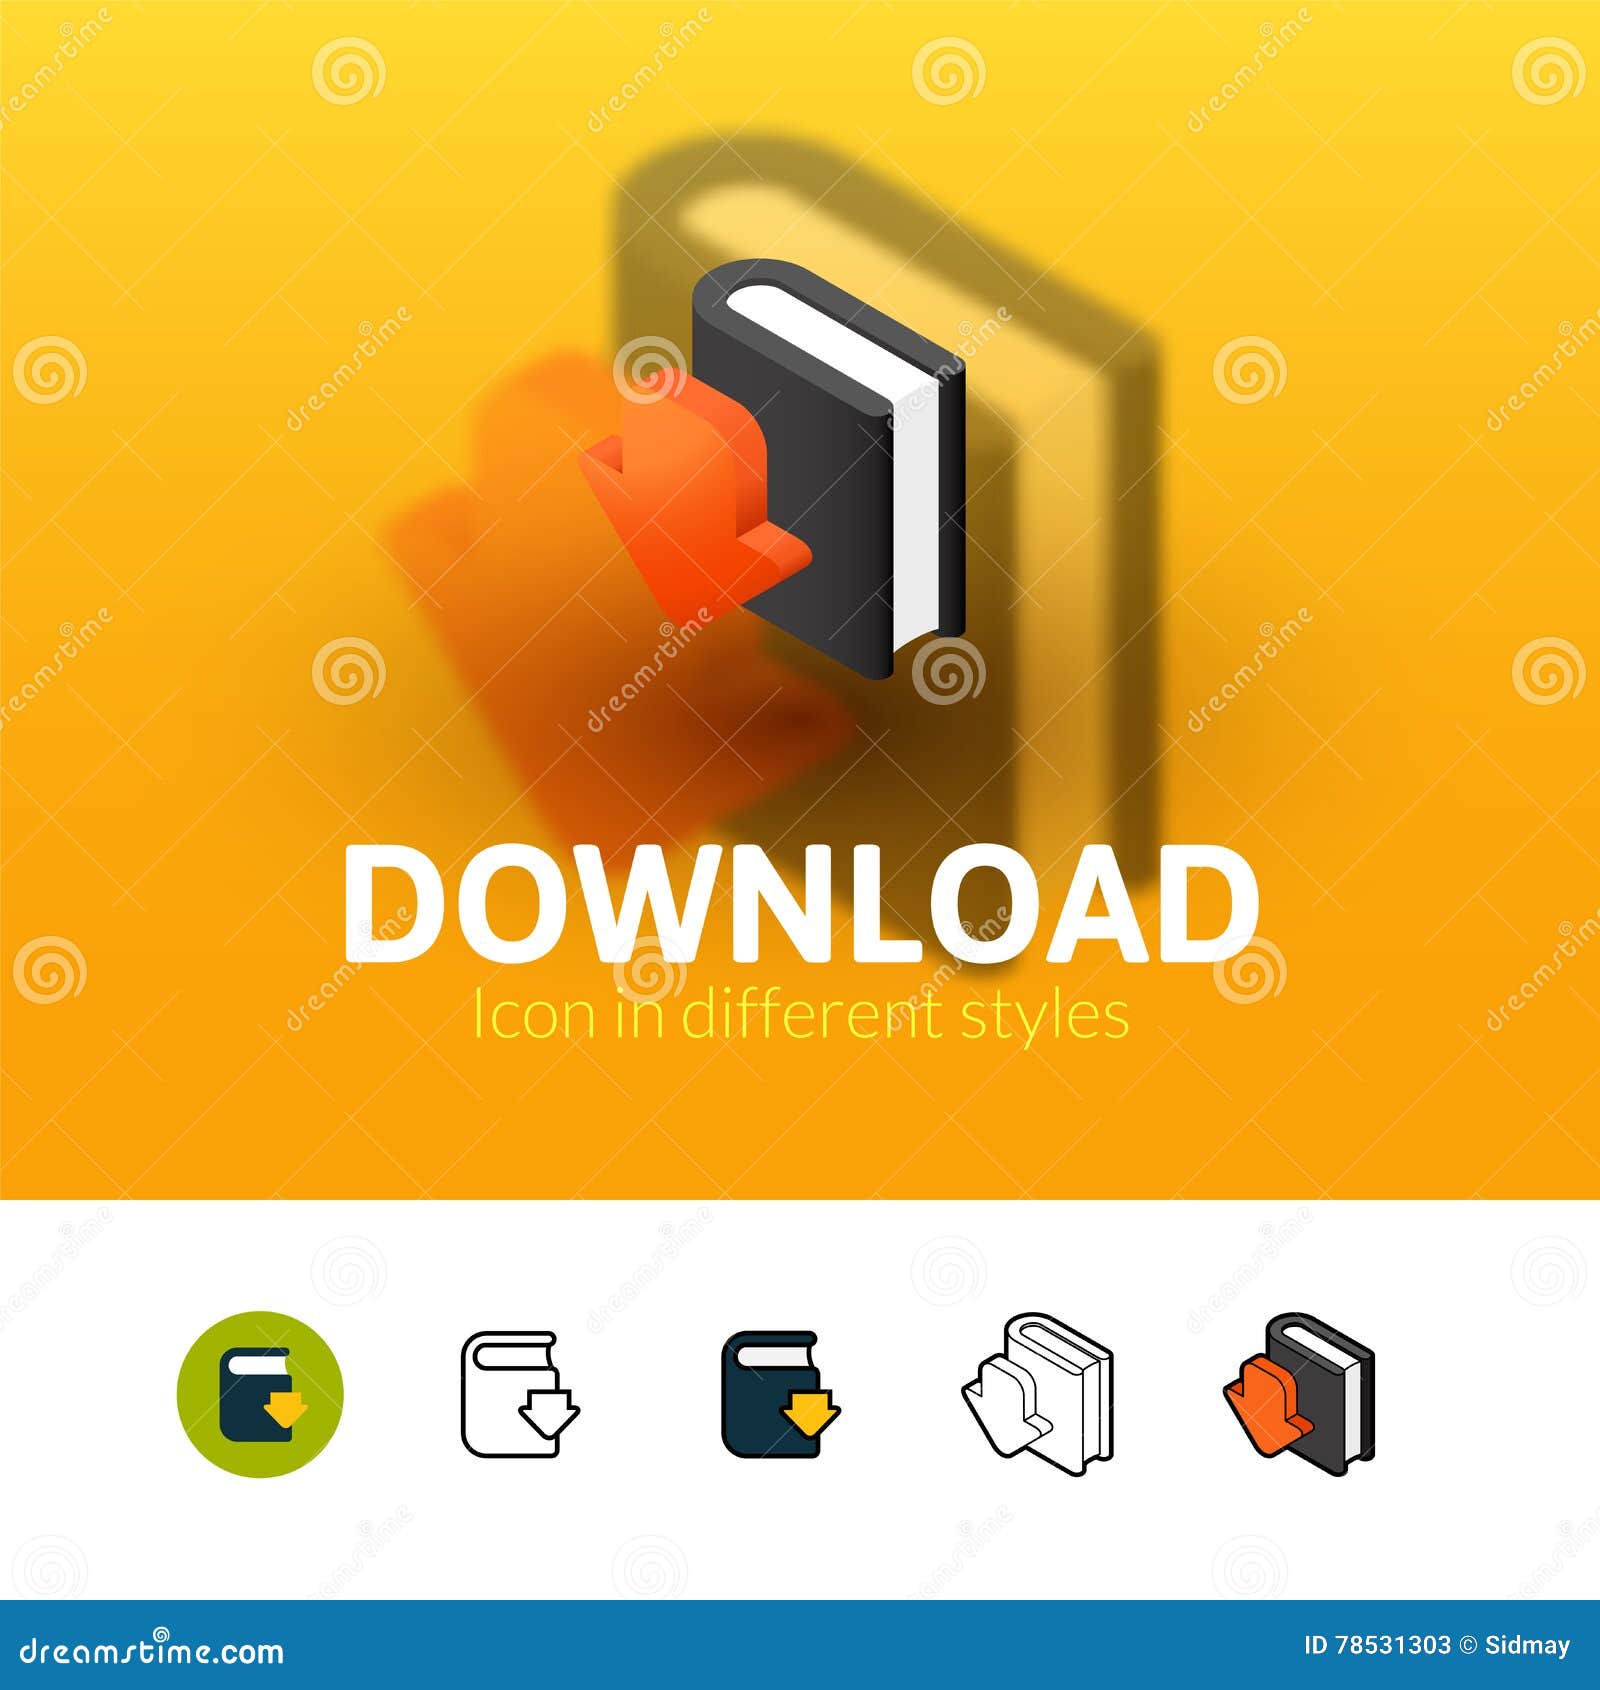 download icon in different style